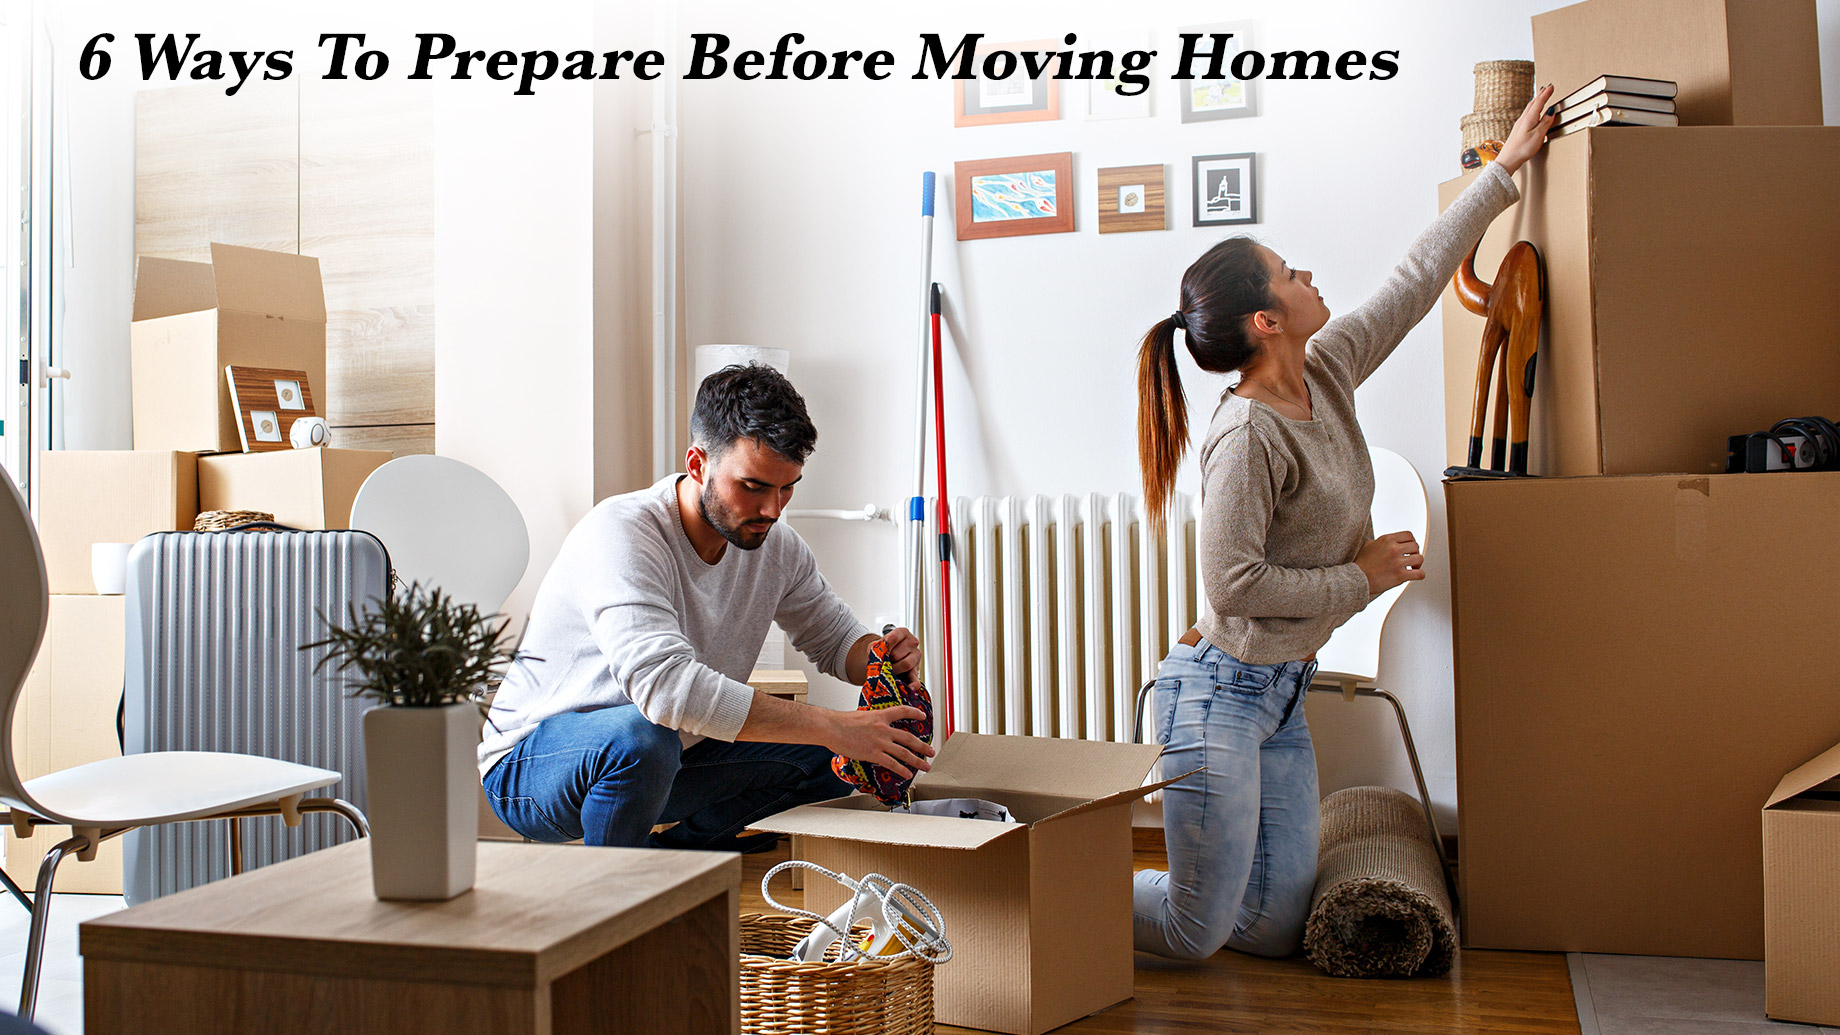 6 Ways To Prepare Before Moving Homes